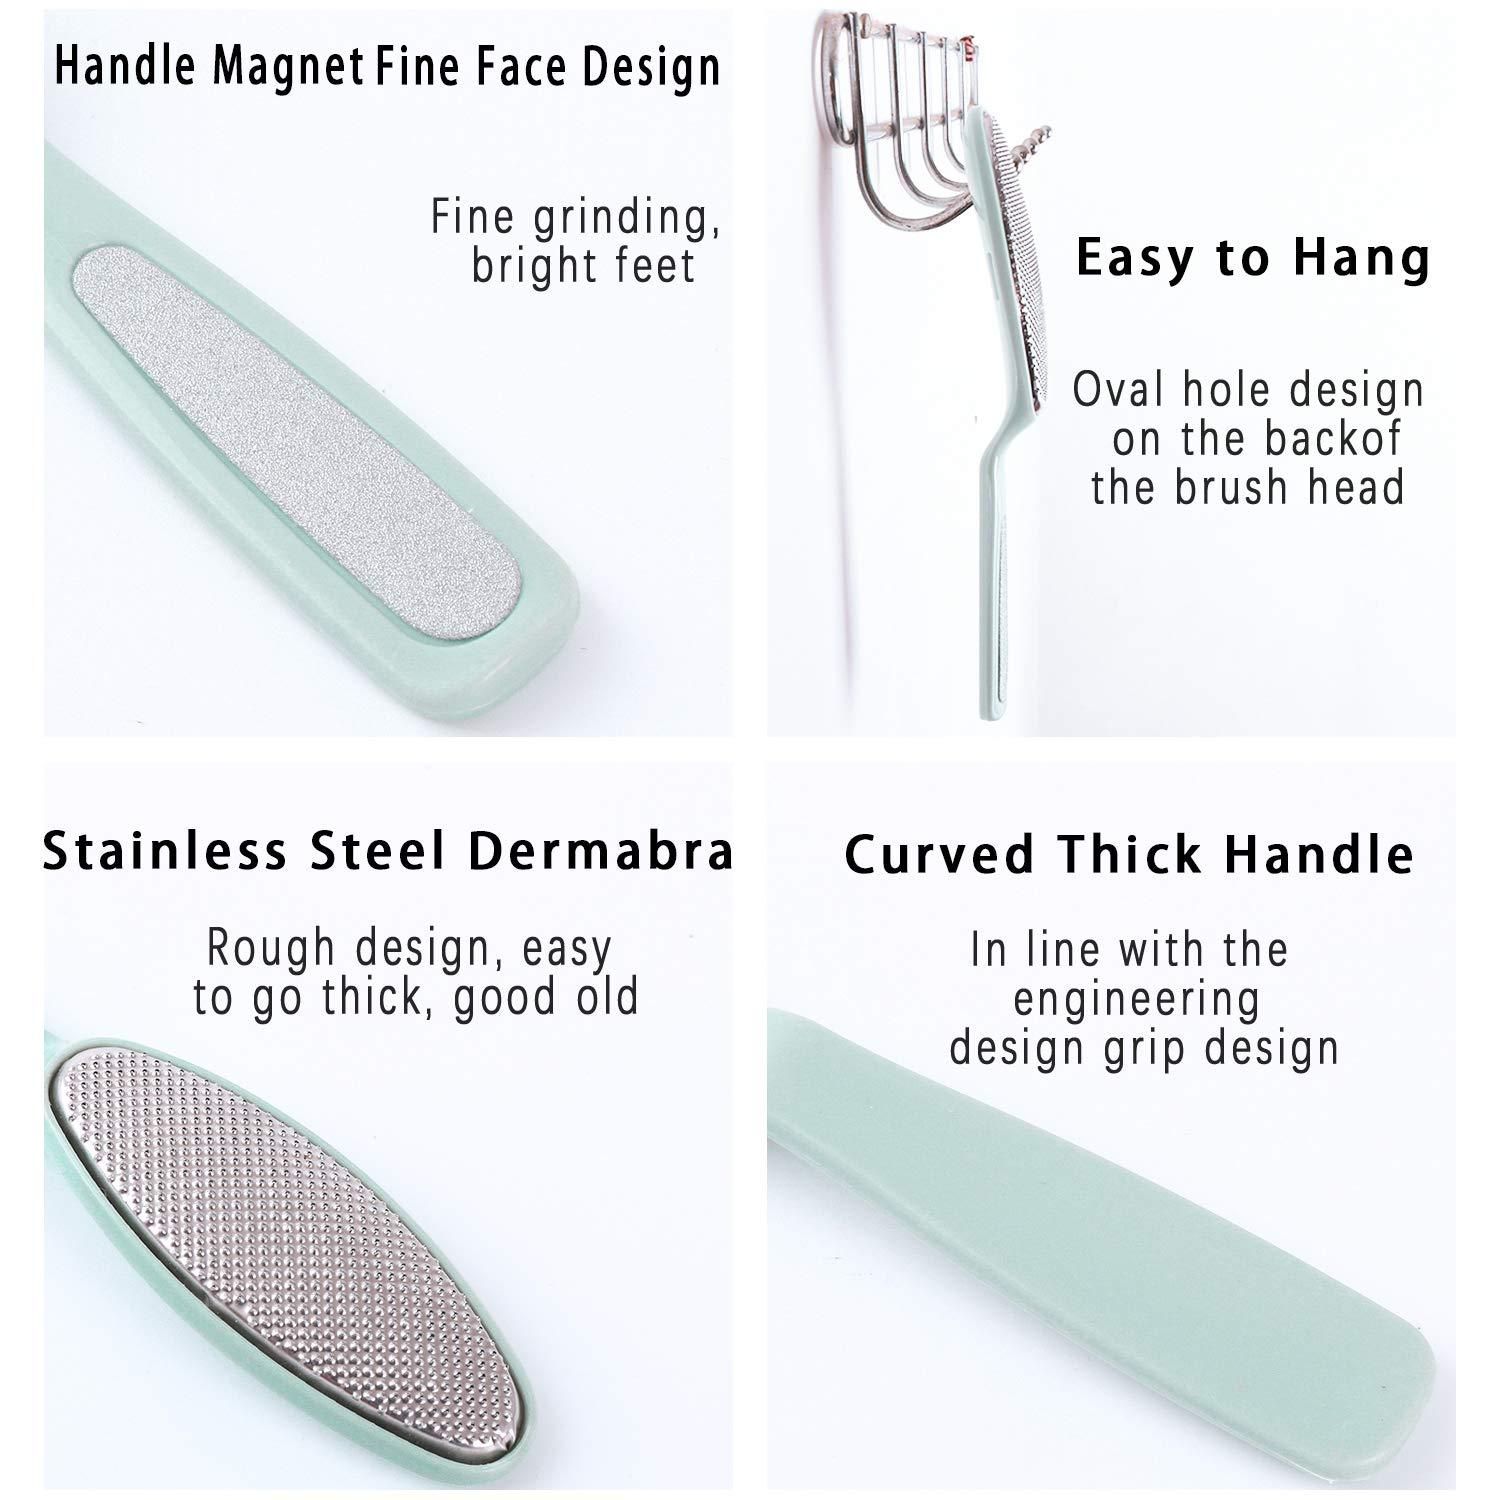 Handle Nail Brush Fingernail Brush Cleaner Hand Scrub Cleaning Brush for Toes，Stainless Steel Foot File Pedicure Metal Surface Tool To Remove Hard Skin Four Color - image 4 of 7